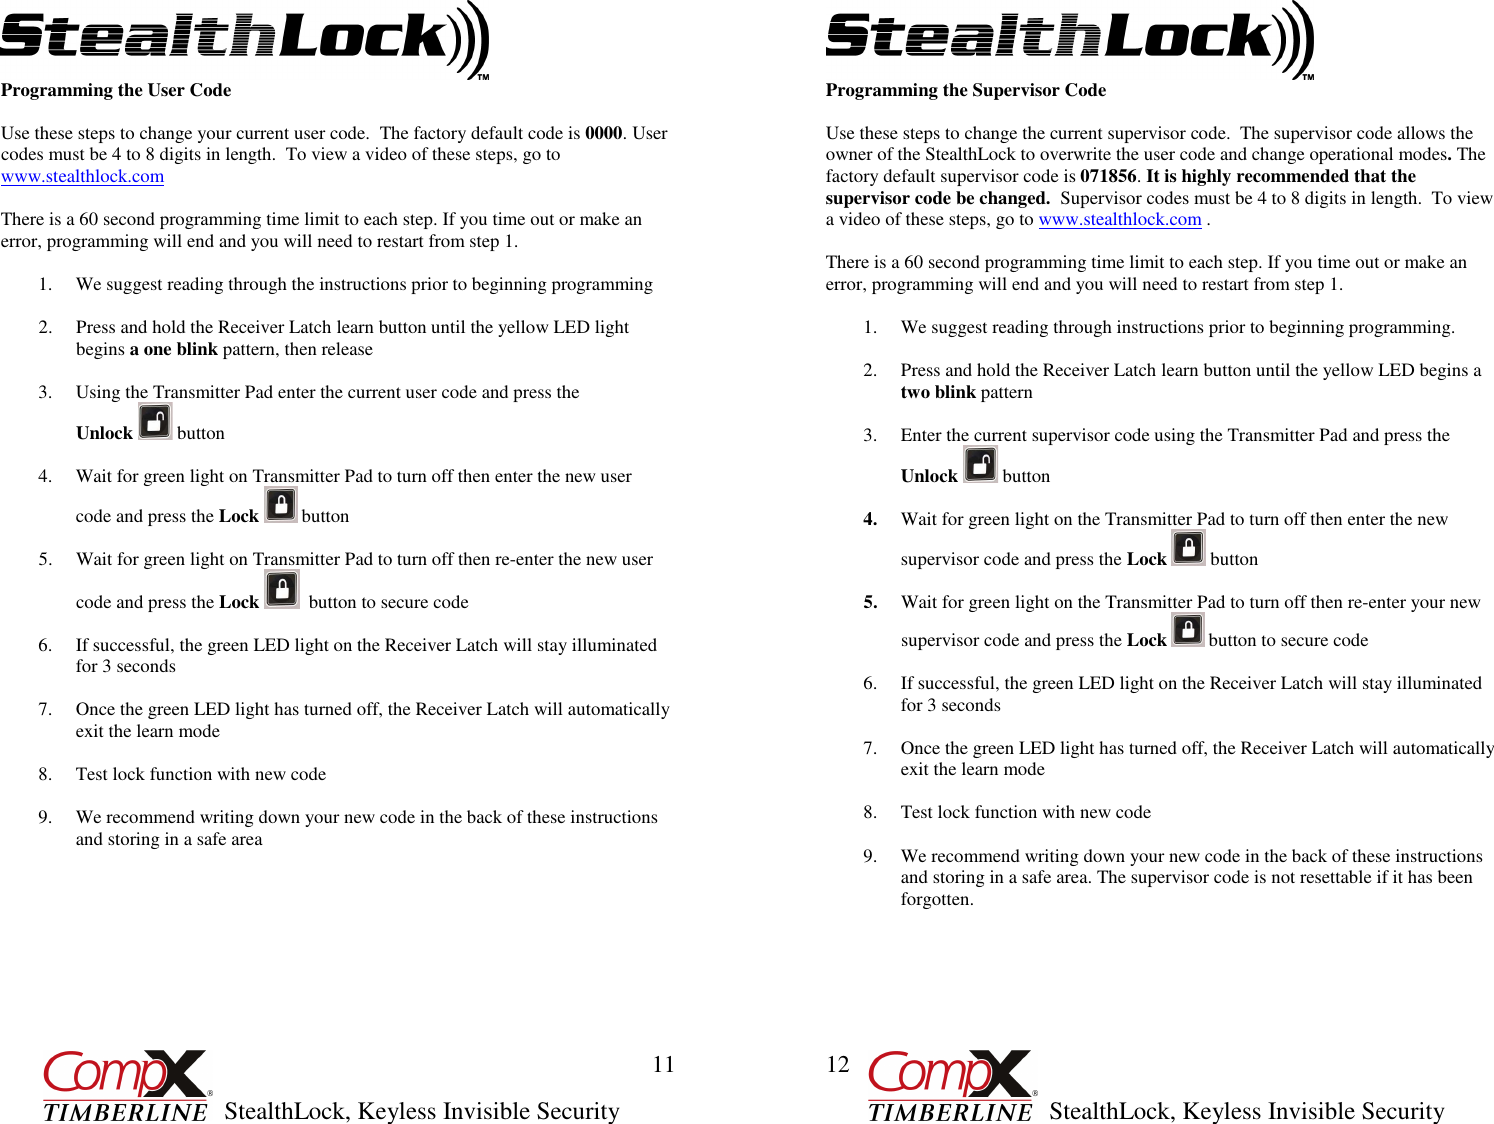         StealthLock, Keyless Invisible Security  11 Programming the User Code  Use these steps to change your current user code.  The factory default code is 0000. User codes must be 4 to 8 digits in length.  To view a video of these steps, go to www.stealthlock.com  There is a 60 second programming time limit to each step. If you time out or make an error, programming will end and you will need to restart from step 1.  1. We suggest reading through the instructions prior to beginning programming   2. Press and hold the Receiver Latch learn button until the yellow LED light begins a one blink pattern, then release     3. Using the Transmitter Pad enter the current user code and press the                  Unlock   button   4. Wait for green light on Transmitter Pad to turn off then enter the new user  code and press the Lock   button   5. Wait for green light on Transmitter Pad to turn off then re-enter the new user  code and press the Lock    button to secure code    6. If successful, the green LED light on the Receiver Latch will stay illuminated for 3 seconds  7. Once the green LED light has turned off, the Receiver Latch will automatically exit the learn mode  8. Test lock function with new code  9. We recommend writing down your new code in the back of these instructions and storing in a safe area         StealthLock, Keyless Invisible Security  12 Programming the Supervisor Code  Use these steps to change the current supervisor code.  The supervisor code allows the owner of the StealthLock to overwrite the user code and change operational modes. The factory default supervisor code is 071856. It is highly recommended that the supervisor code be changed.  Supervisor codes must be 4 to 8 digits in length.  To view a video of these steps, go to www.stealthlock.com .  There is a 60 second programming time limit to each step. If you time out or make an error, programming will end and you will need to restart from step 1.  1. We suggest reading through instructions prior to beginning programming.   2. Press and hold the Receiver Latch learn button until the yellow LED begins a two blink pattern   3. Enter the current supervisor code using the Transmitter Pad and press the Unlock   button   4. Wait for green light on the Transmitter Pad to turn off then enter the new supervisor code and press the Lock   button  5. Wait for green light on the Transmitter Pad to turn off then re-enter your new supervisor code and press the Lock   button to secure code  6. If successful, the green LED light on the Receiver Latch will stay illuminated for 3 seconds  7. Once the green LED light has turned off, the Receiver Latch will automatically exit the learn mode  8. Test lock function with new code  9. We recommend writing down your new code in the back of these instructions and storing in a safe area. The supervisor code is not resettable if it has been forgotten.       